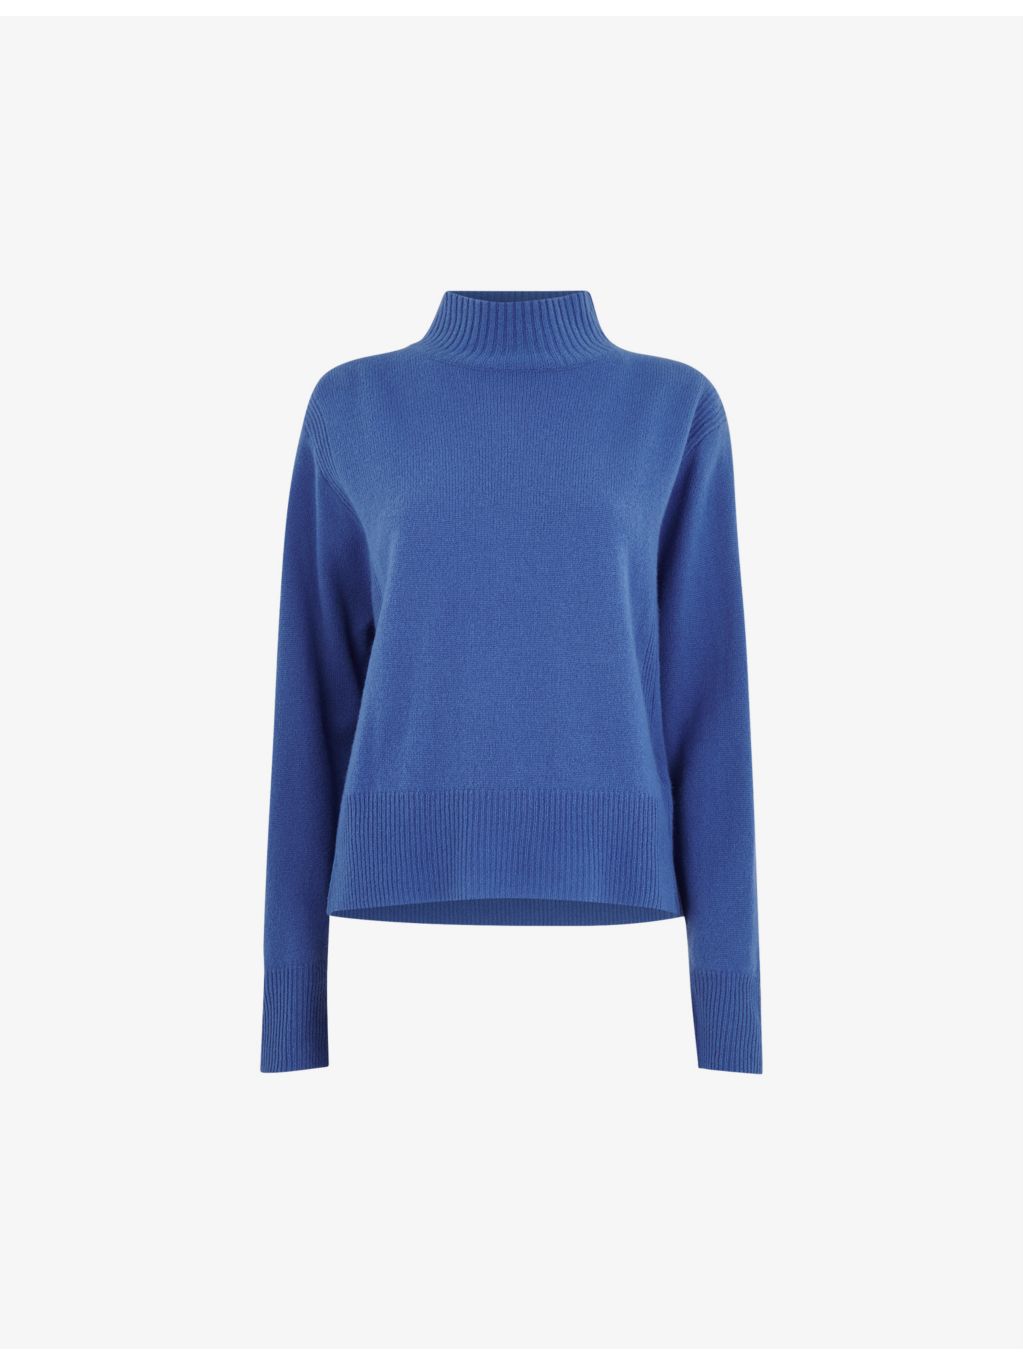 WHISTLES - Ferne wool knitted jumper